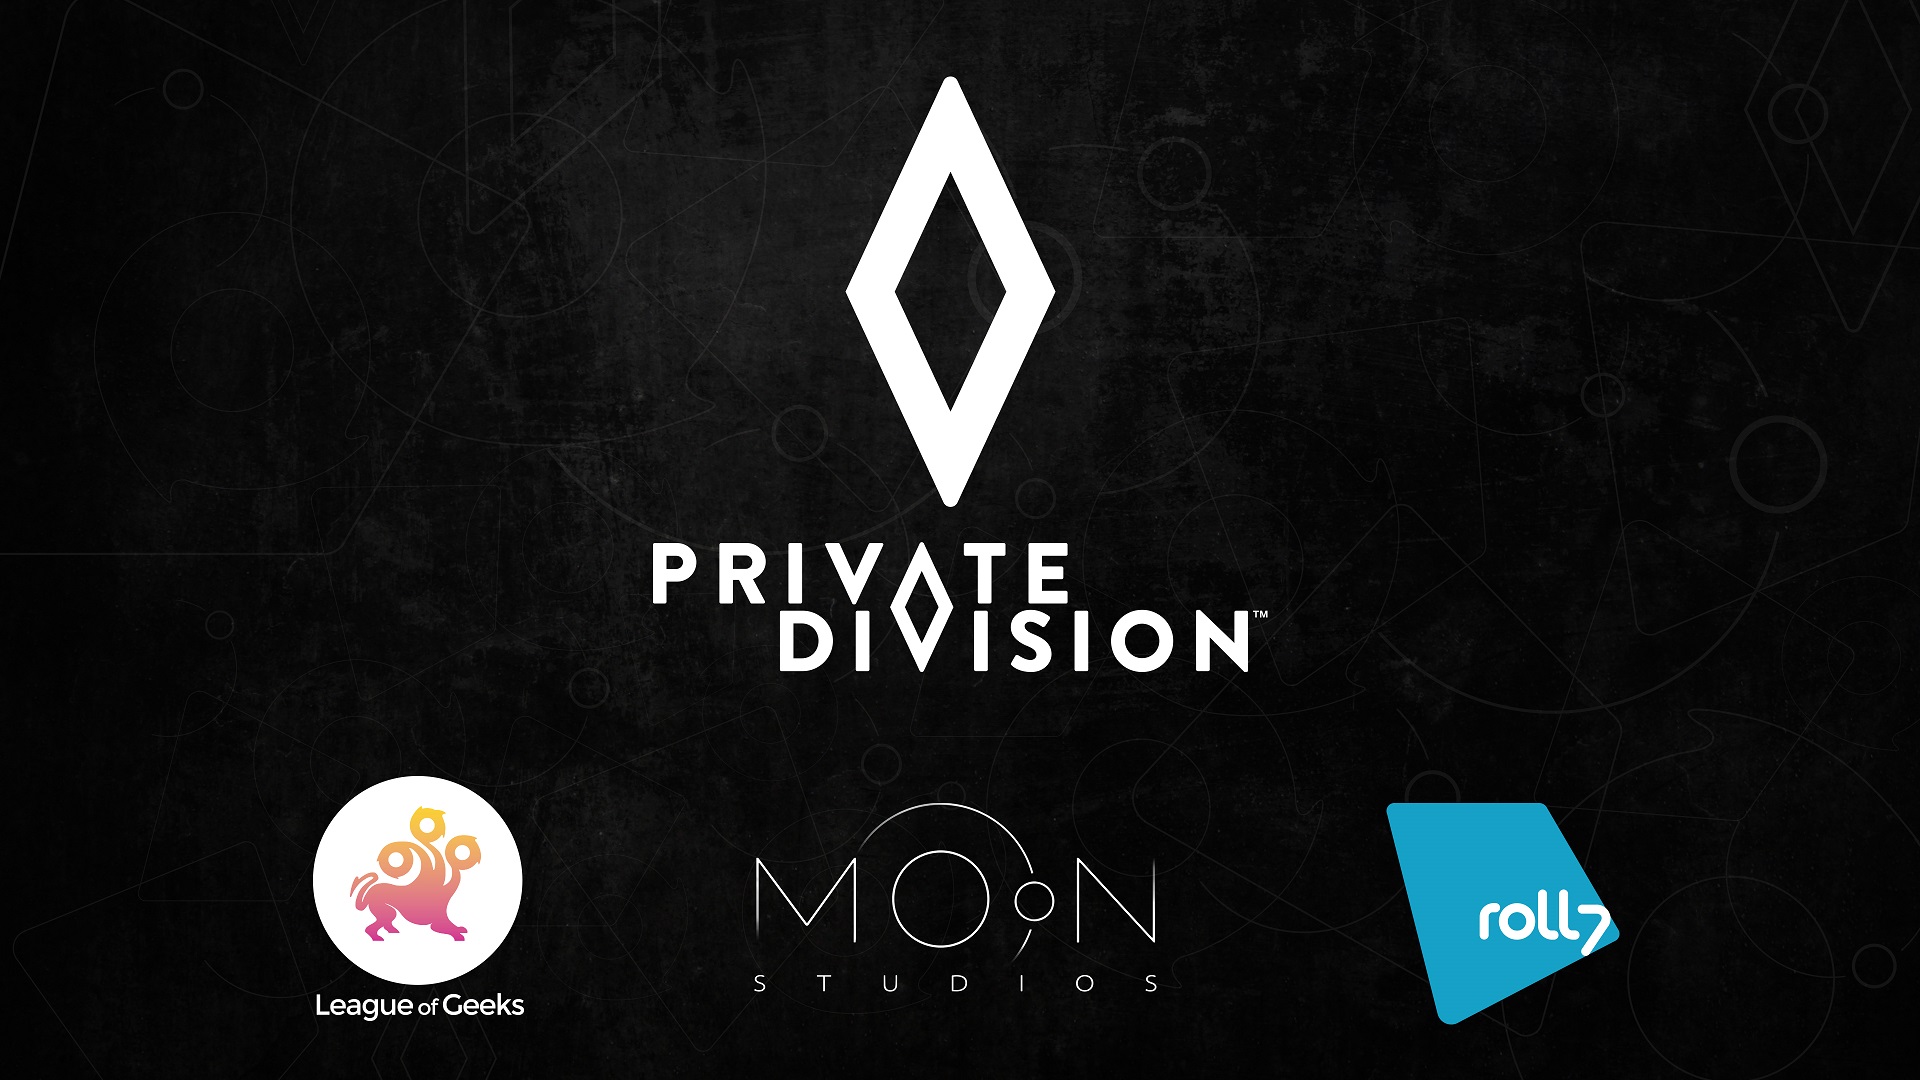 Moon Studios And More Developers Working With Private Division